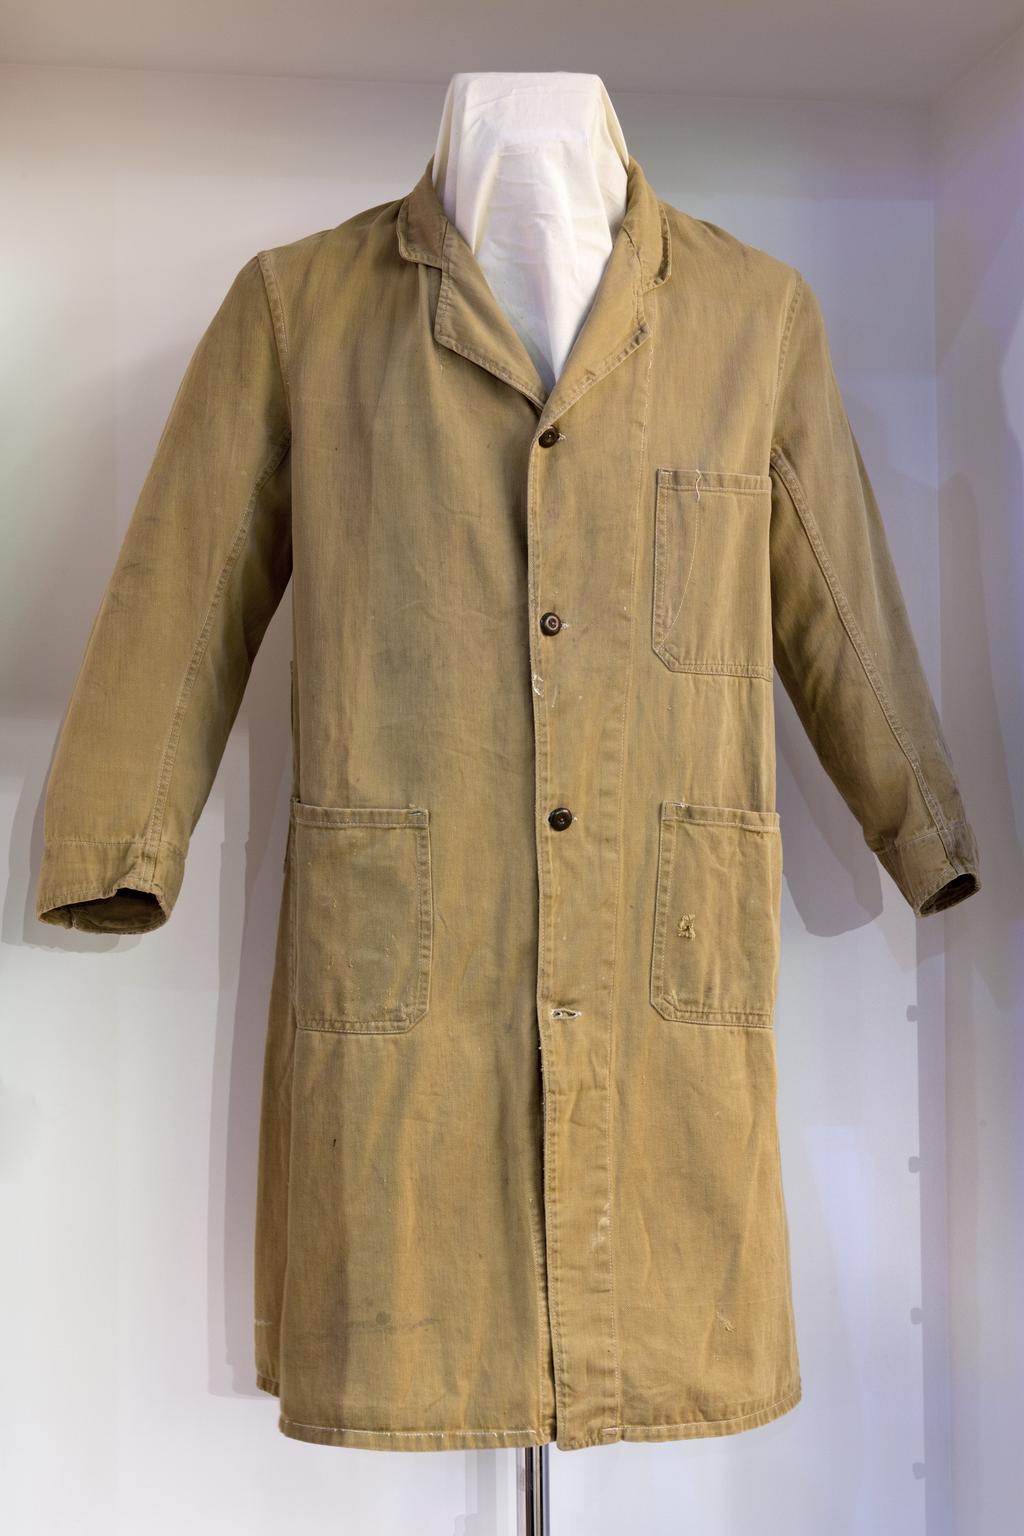 Laboratory coat worn by Geoff Tootill when working on the 'Baby' computer in 1948.